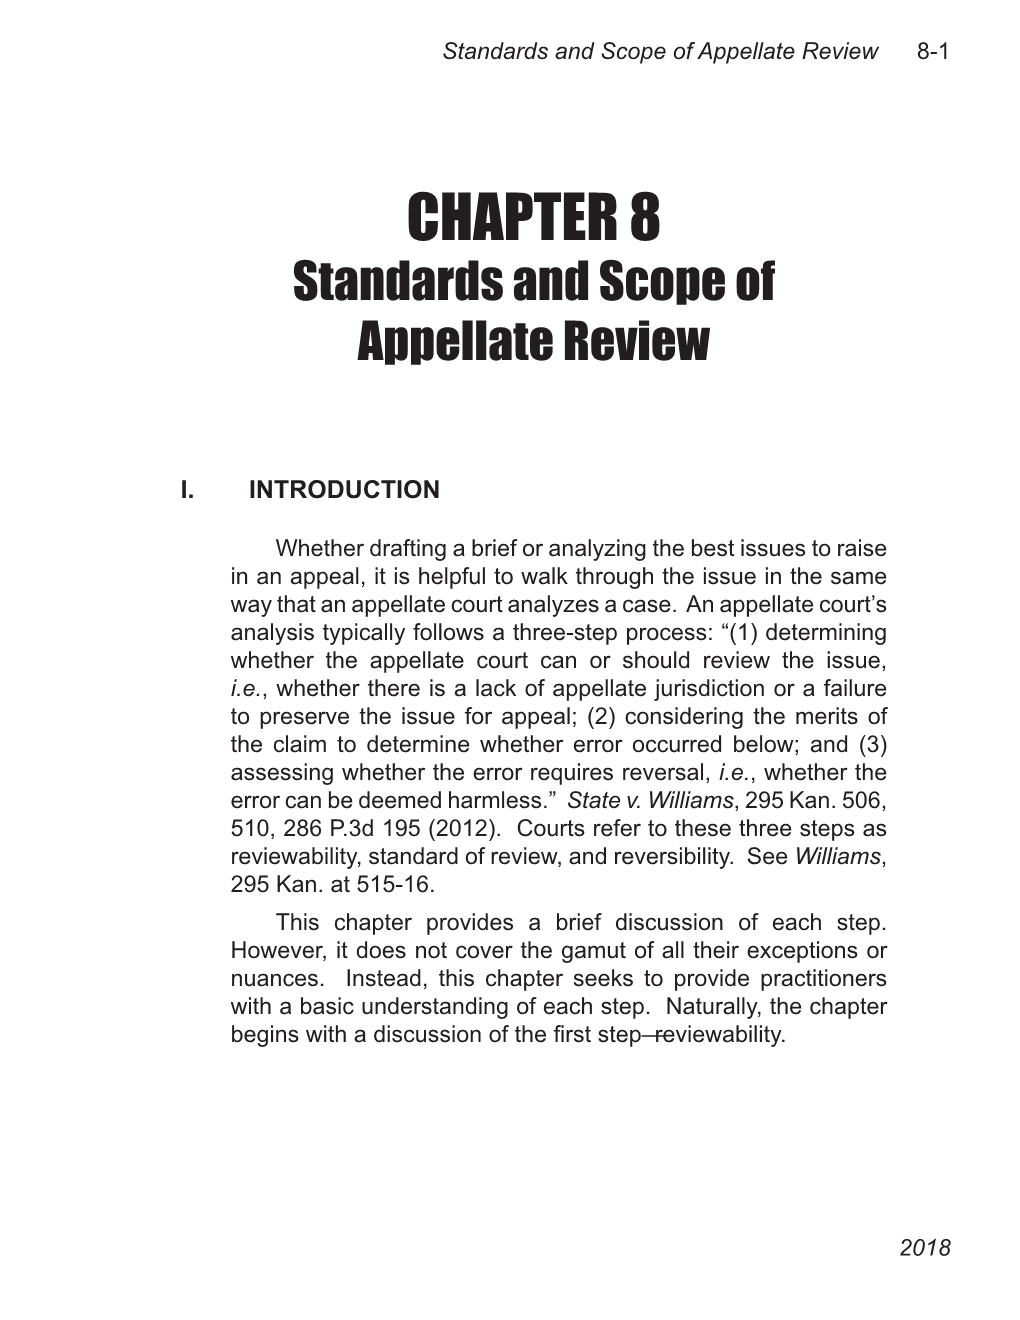 CHAPTER 8 Standards and Scope of Appellate Review